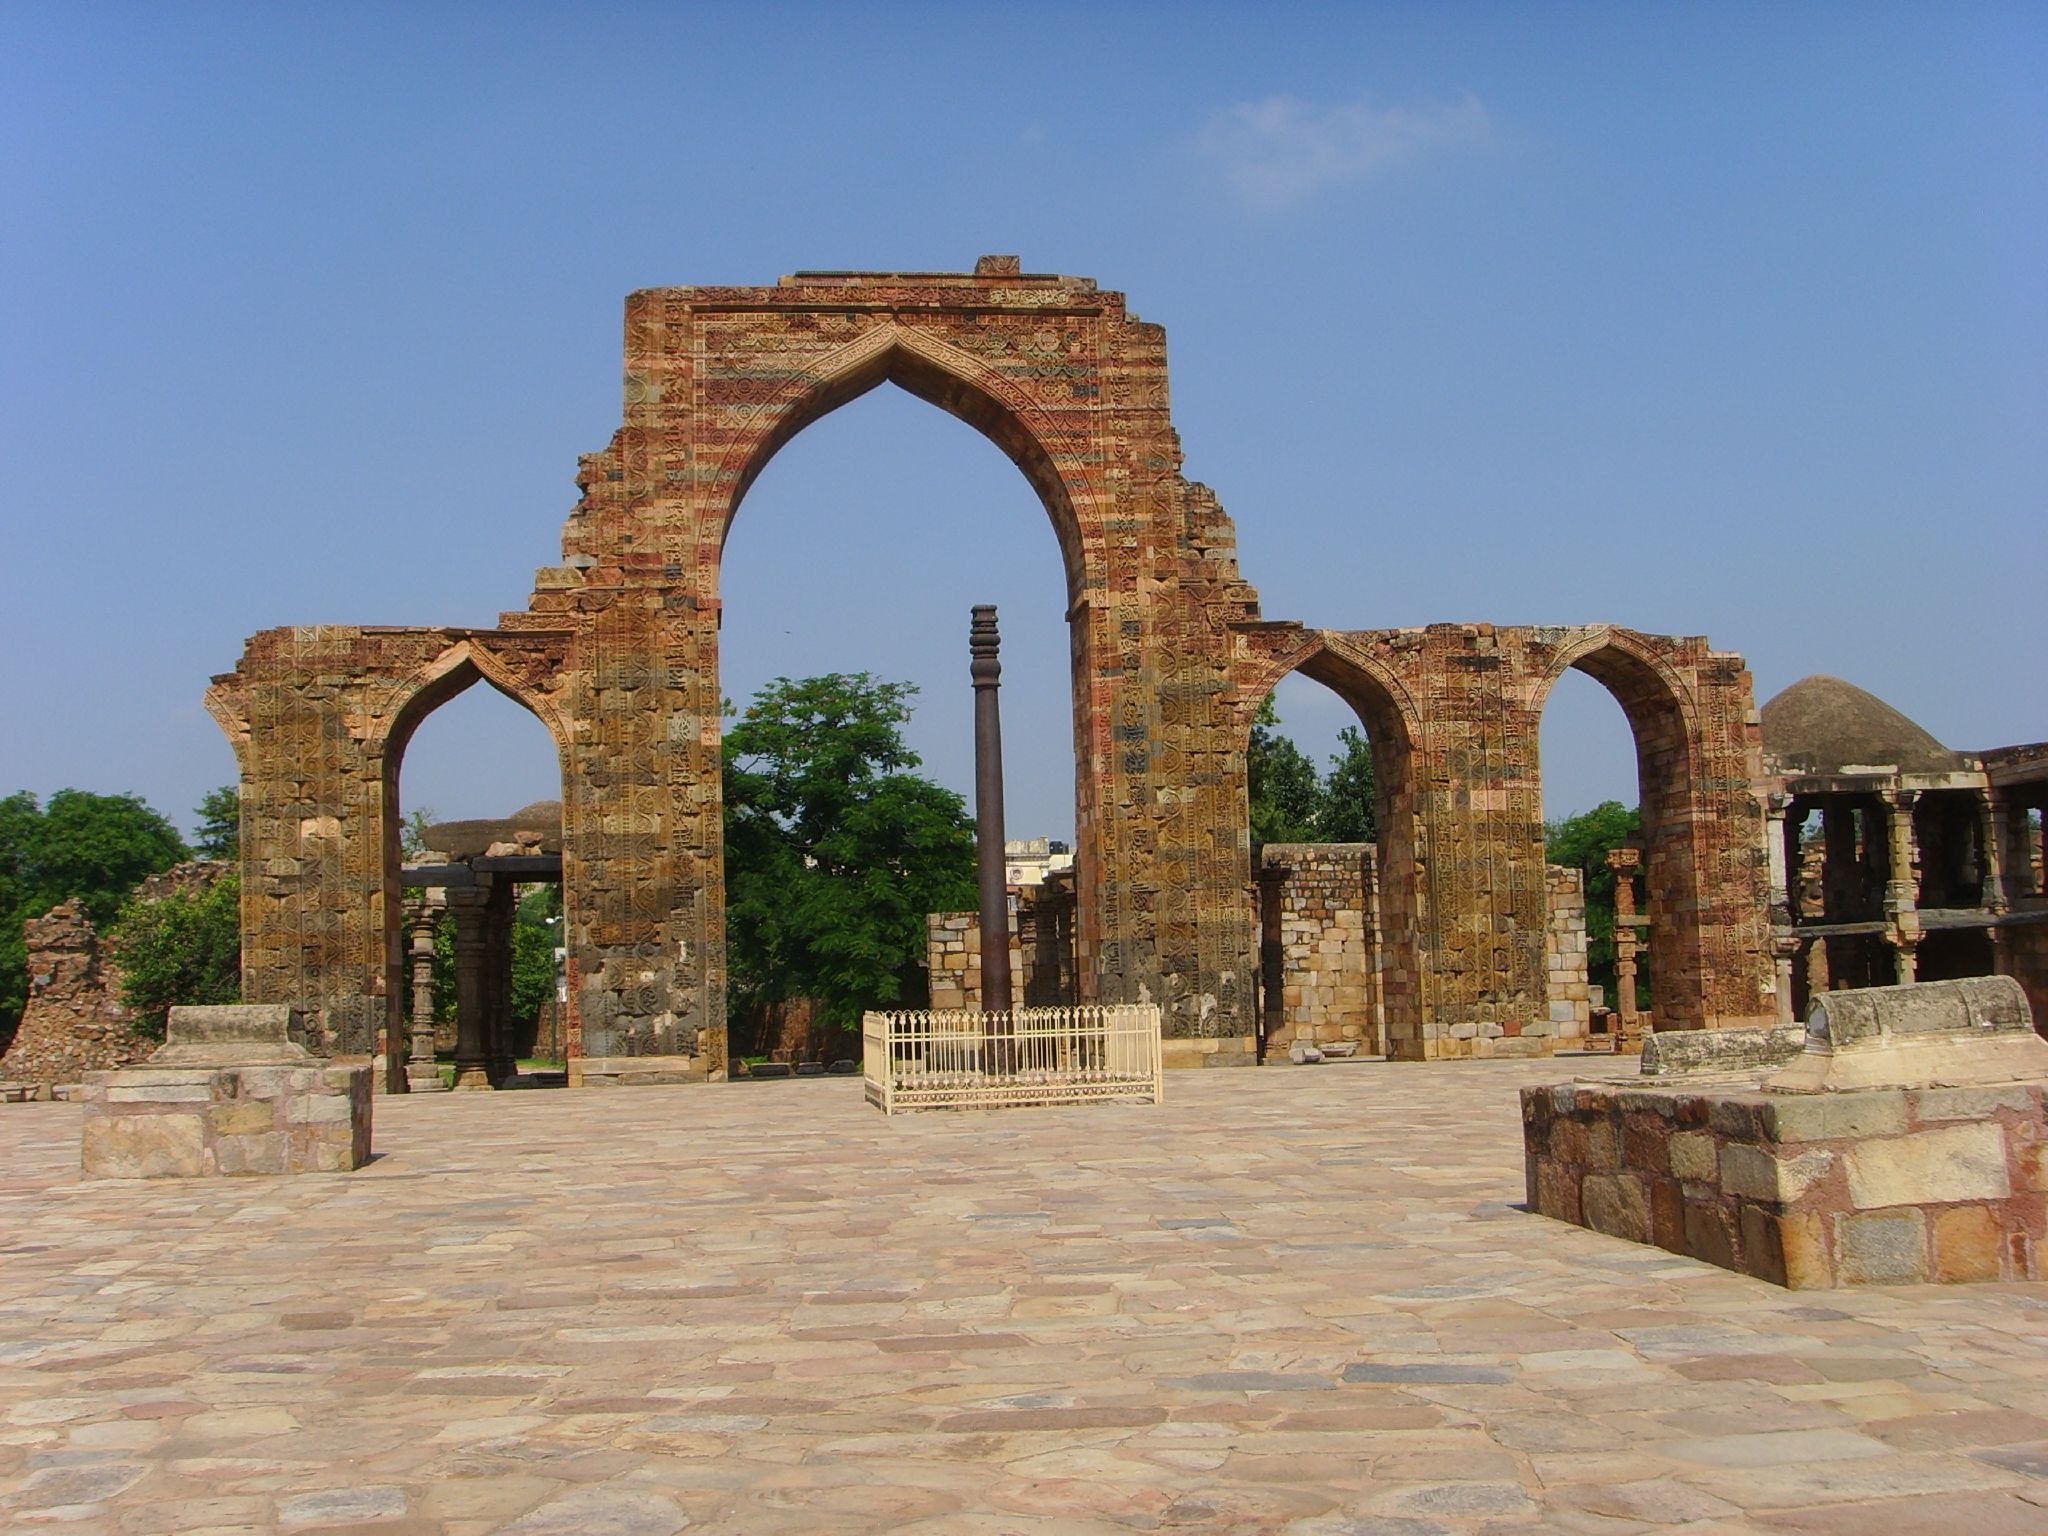 a building made out of stone and brick with an arched archway